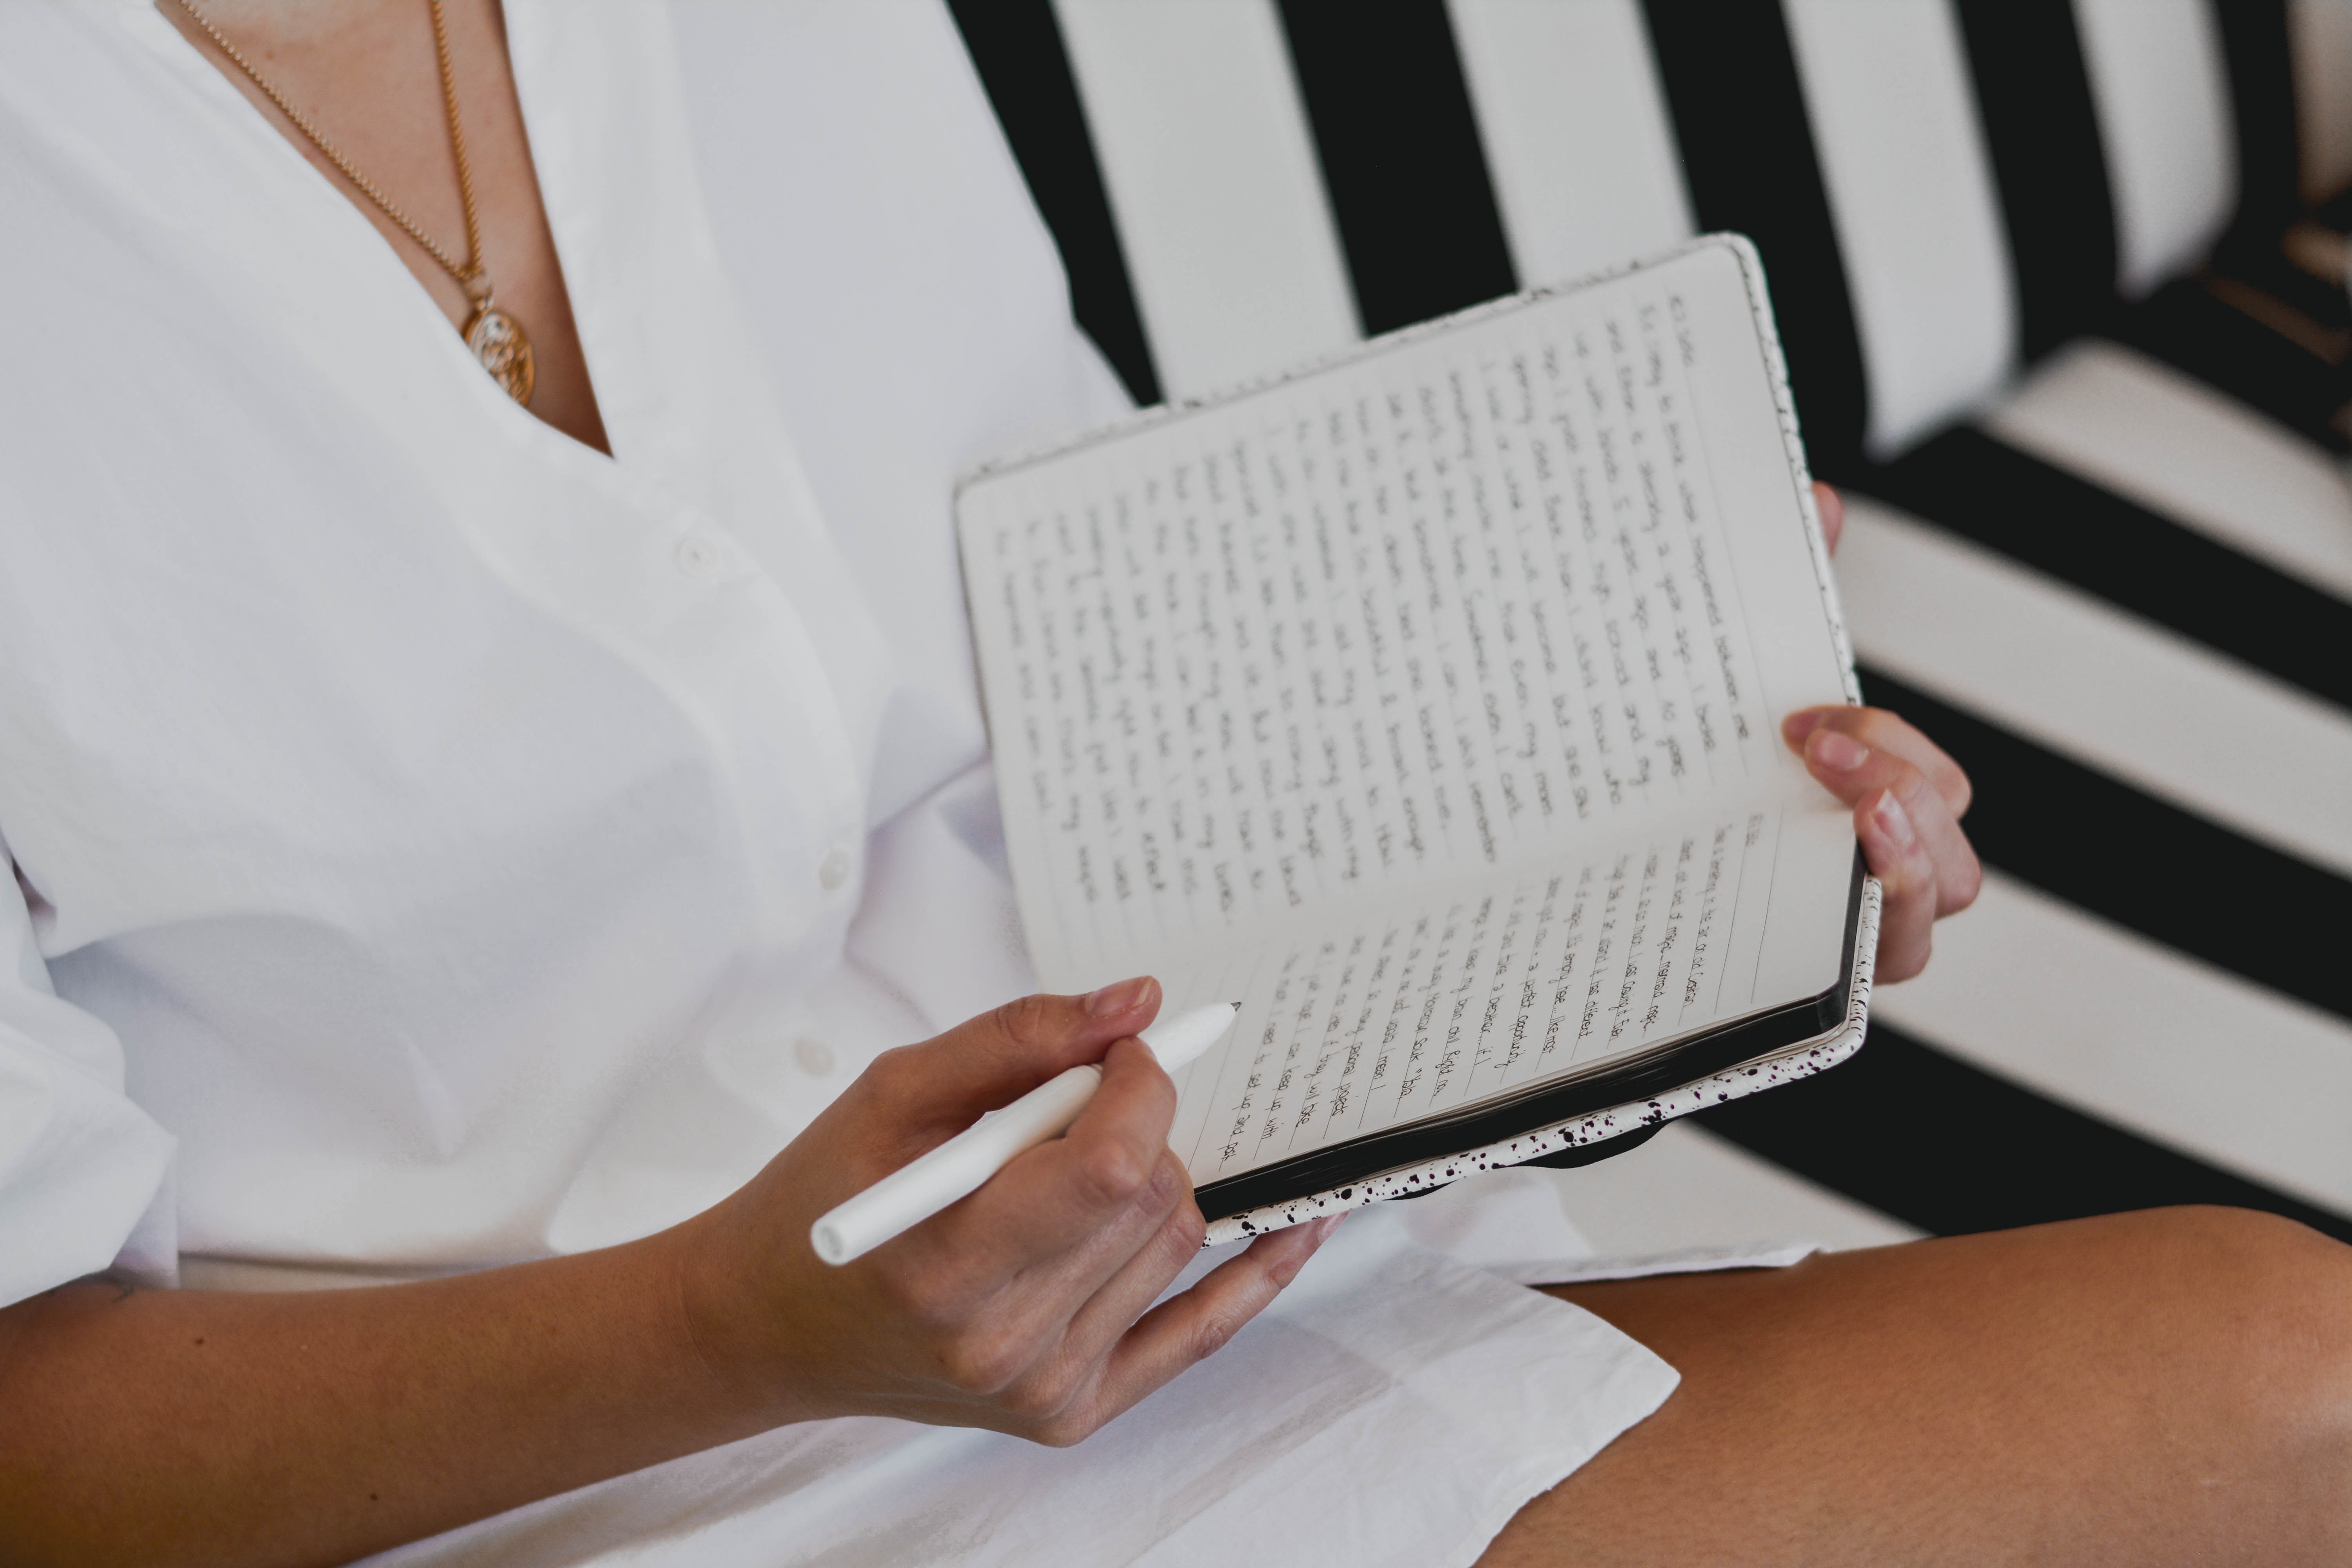 women writing using journal prompts in her journal. She's on a black and white couch.